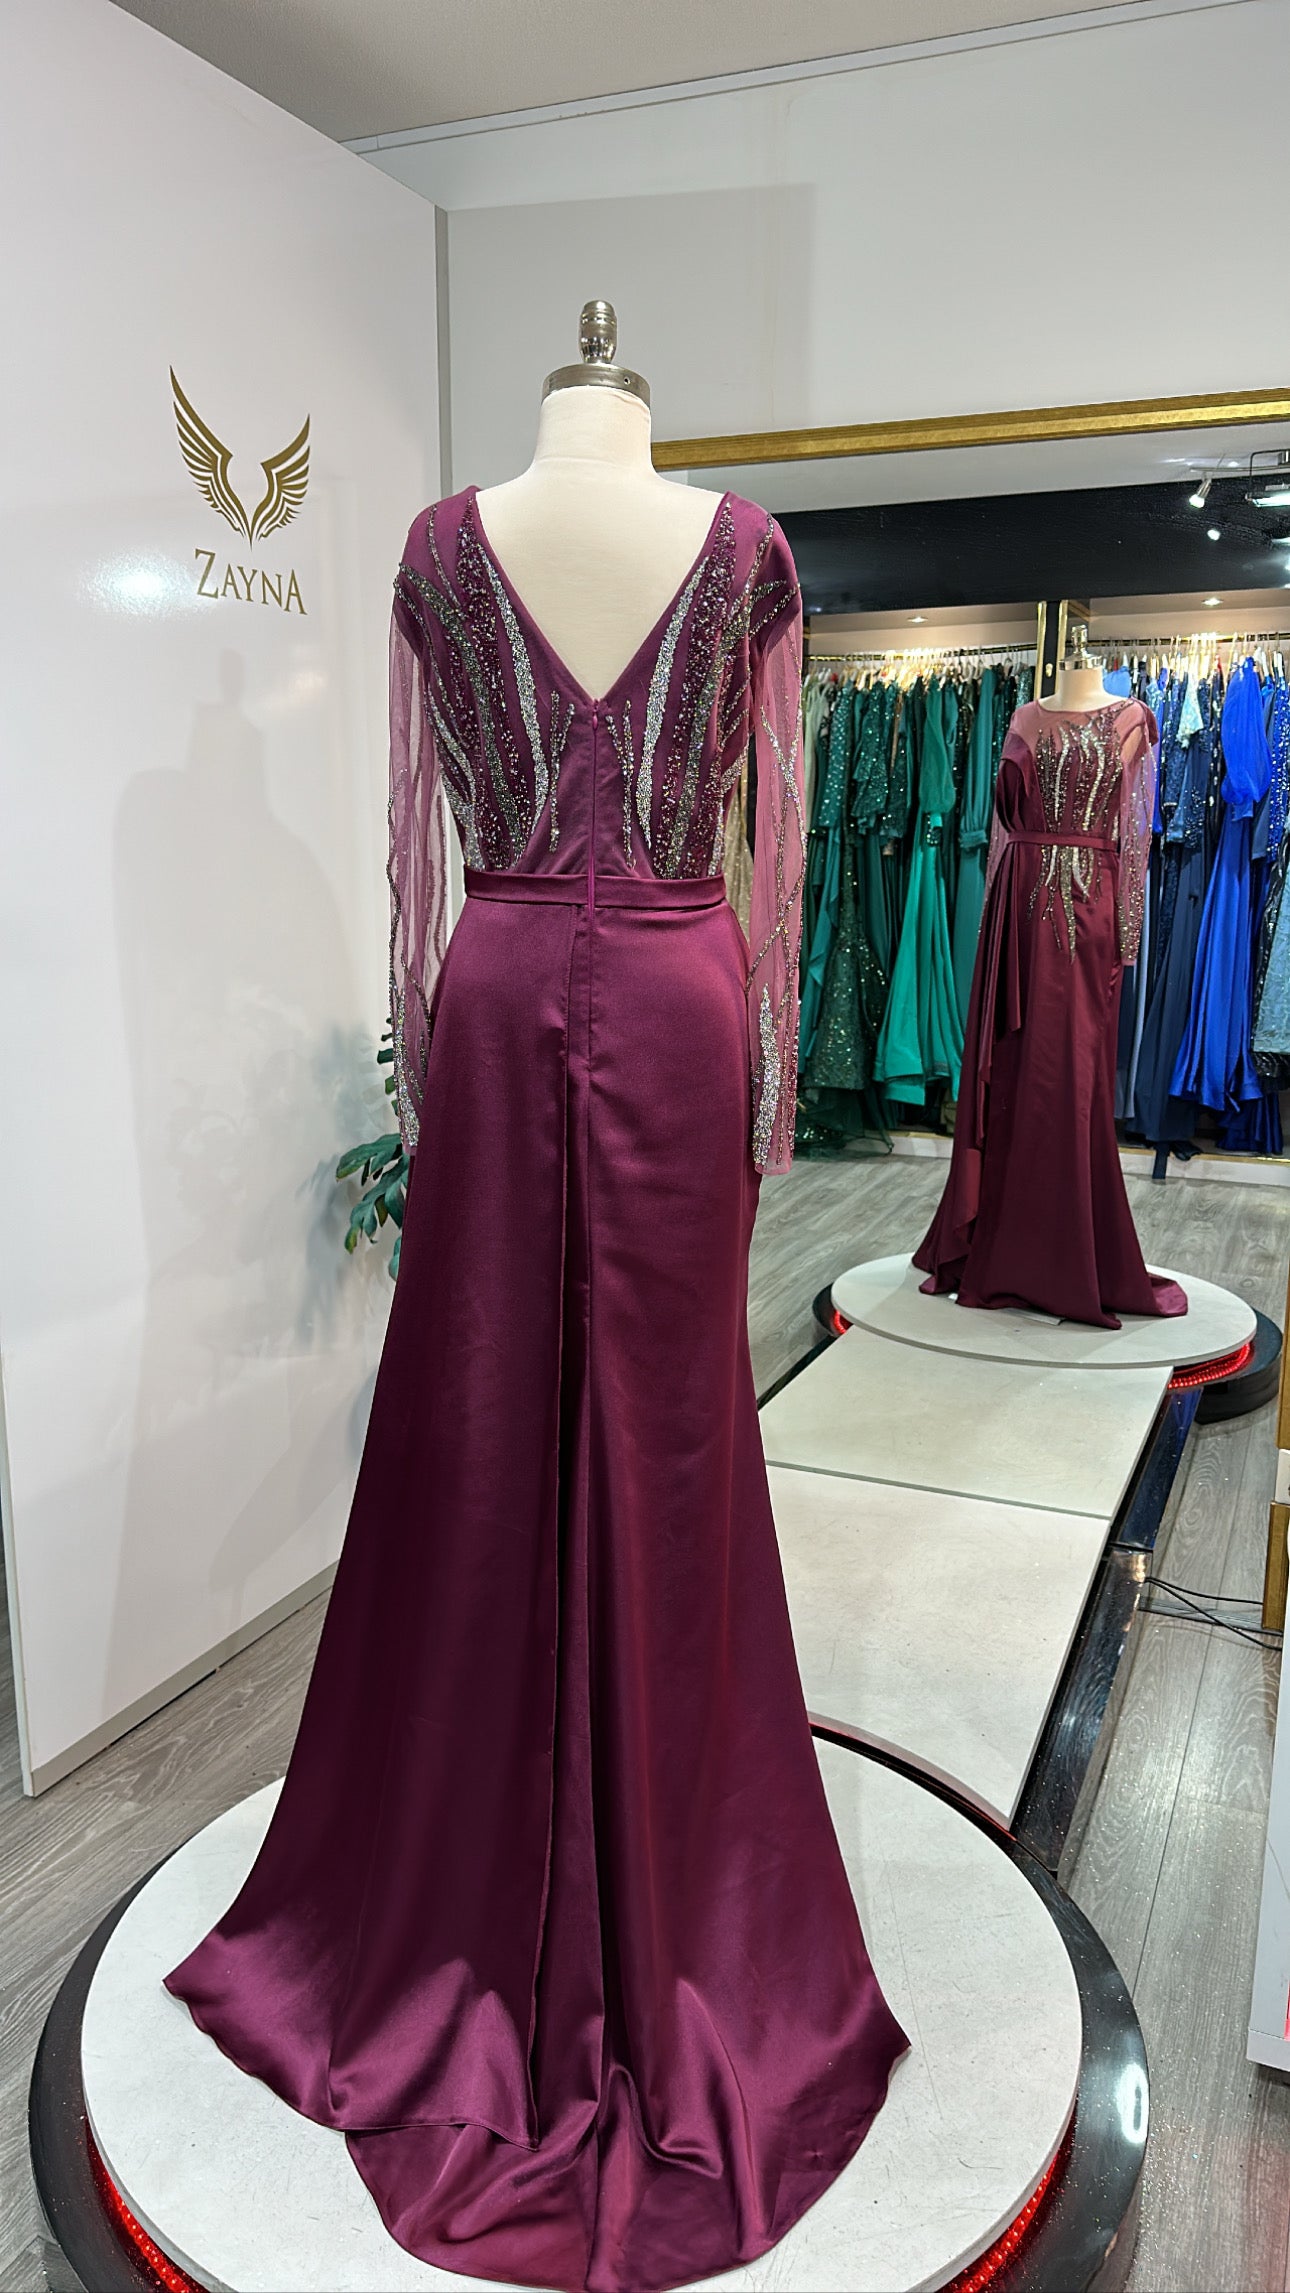 Elegant pink dress decorated with beads, satin